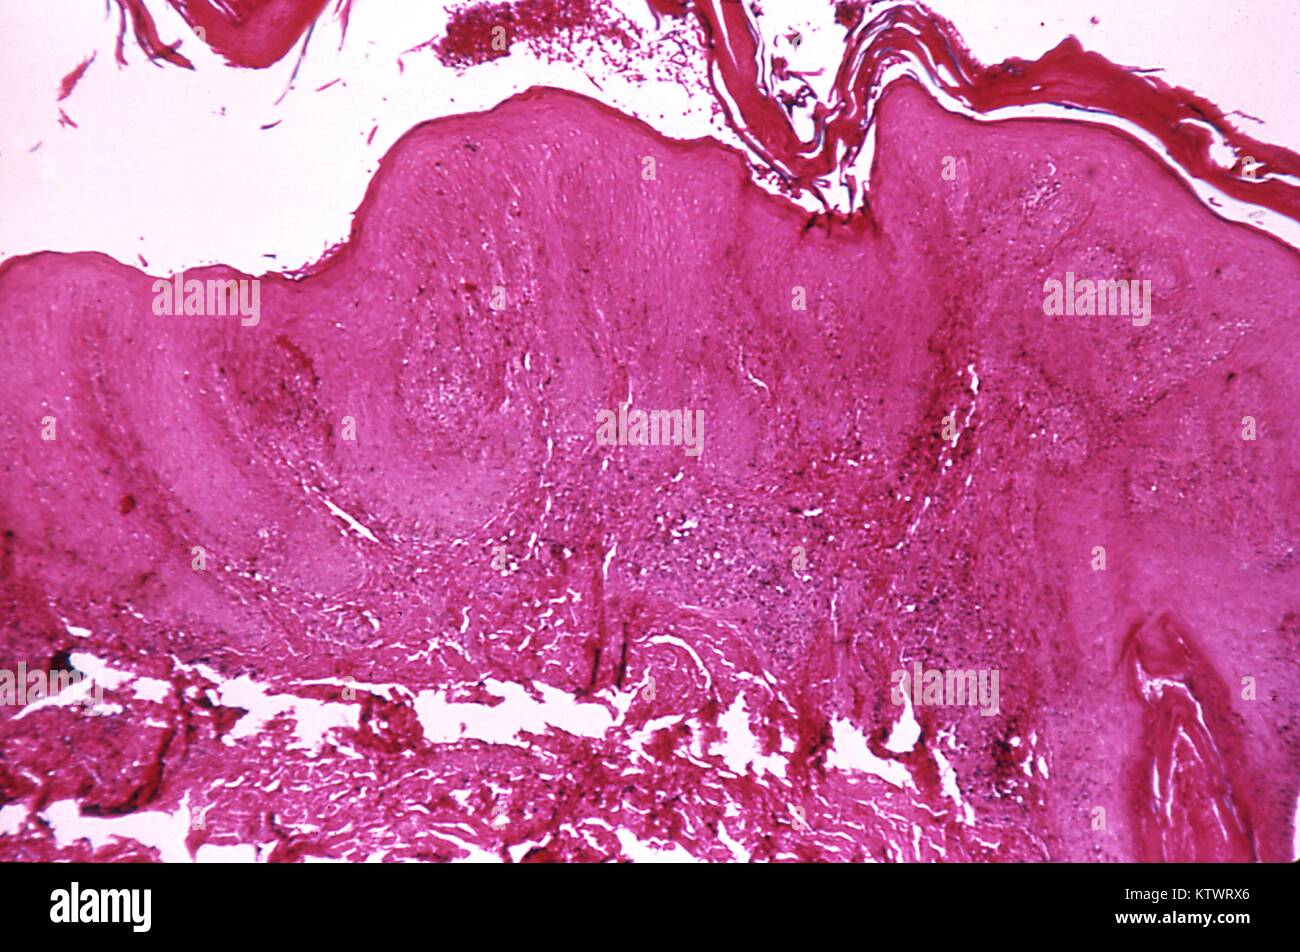 This pinta lesion, stained using the hematoxylin-eosin (HandE) technique, is caused by the bacterium Treponema carateum, magnification 100X. This mature, 20 mos, 1970. old pinta lesion shows signs of hyperkeratosis, parakeratosis, acanthosis, elongation of Rete Pegs and an inflammatory infiltrate in the dermis. The genus Treponema, contains the species pallidum, the cause of syphilis. Image courtesy CDC. Stock Photo